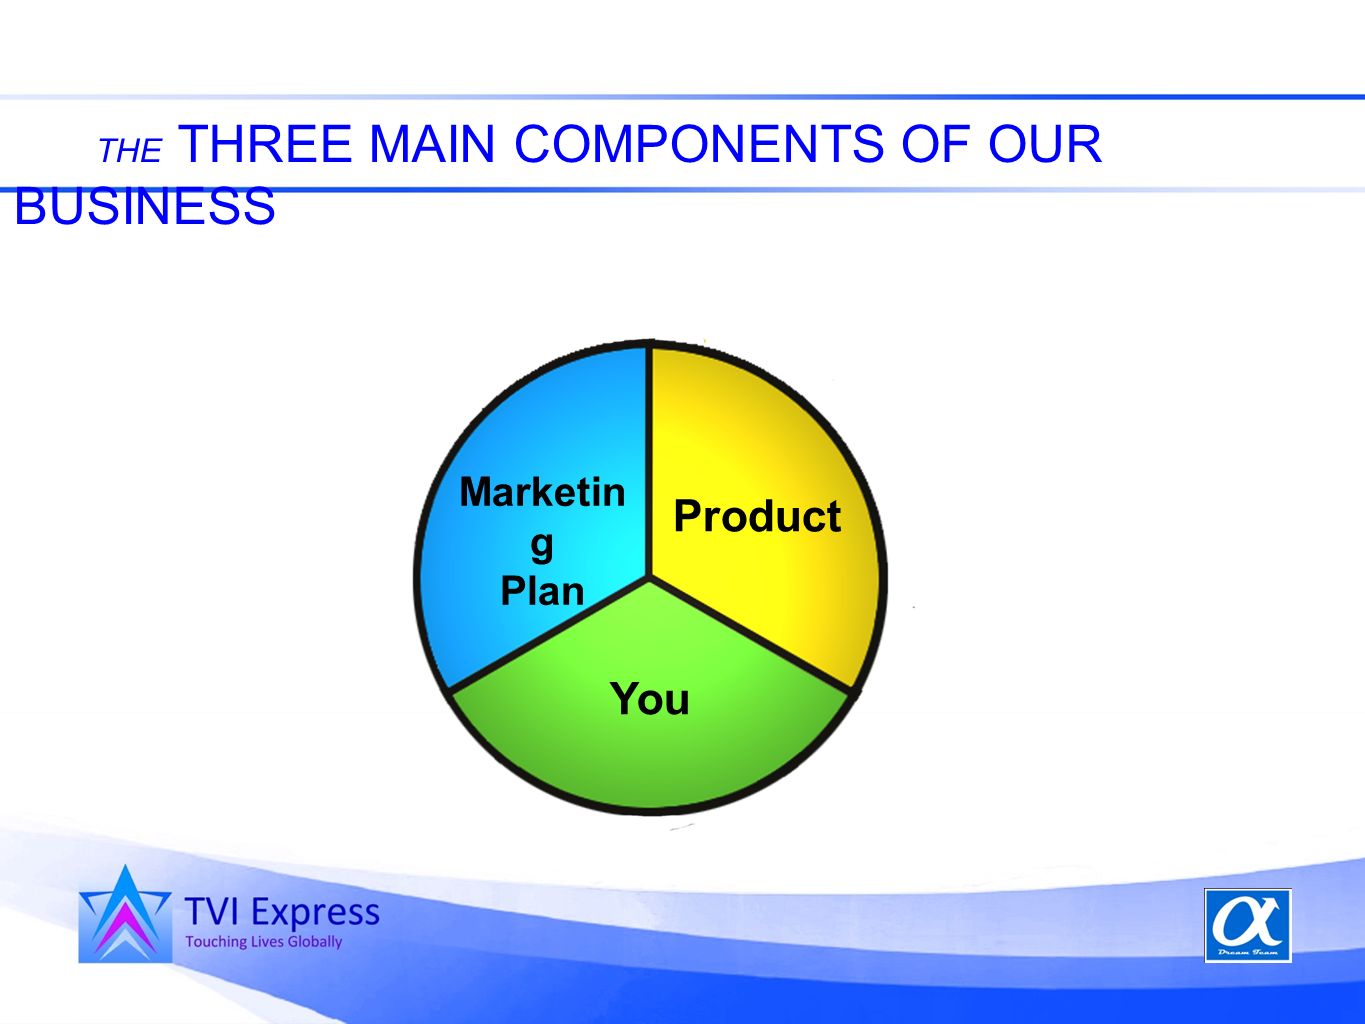 THE THREE MAIN COMPONENTS OF OUR BUSINESS Marketin g Plan You Product